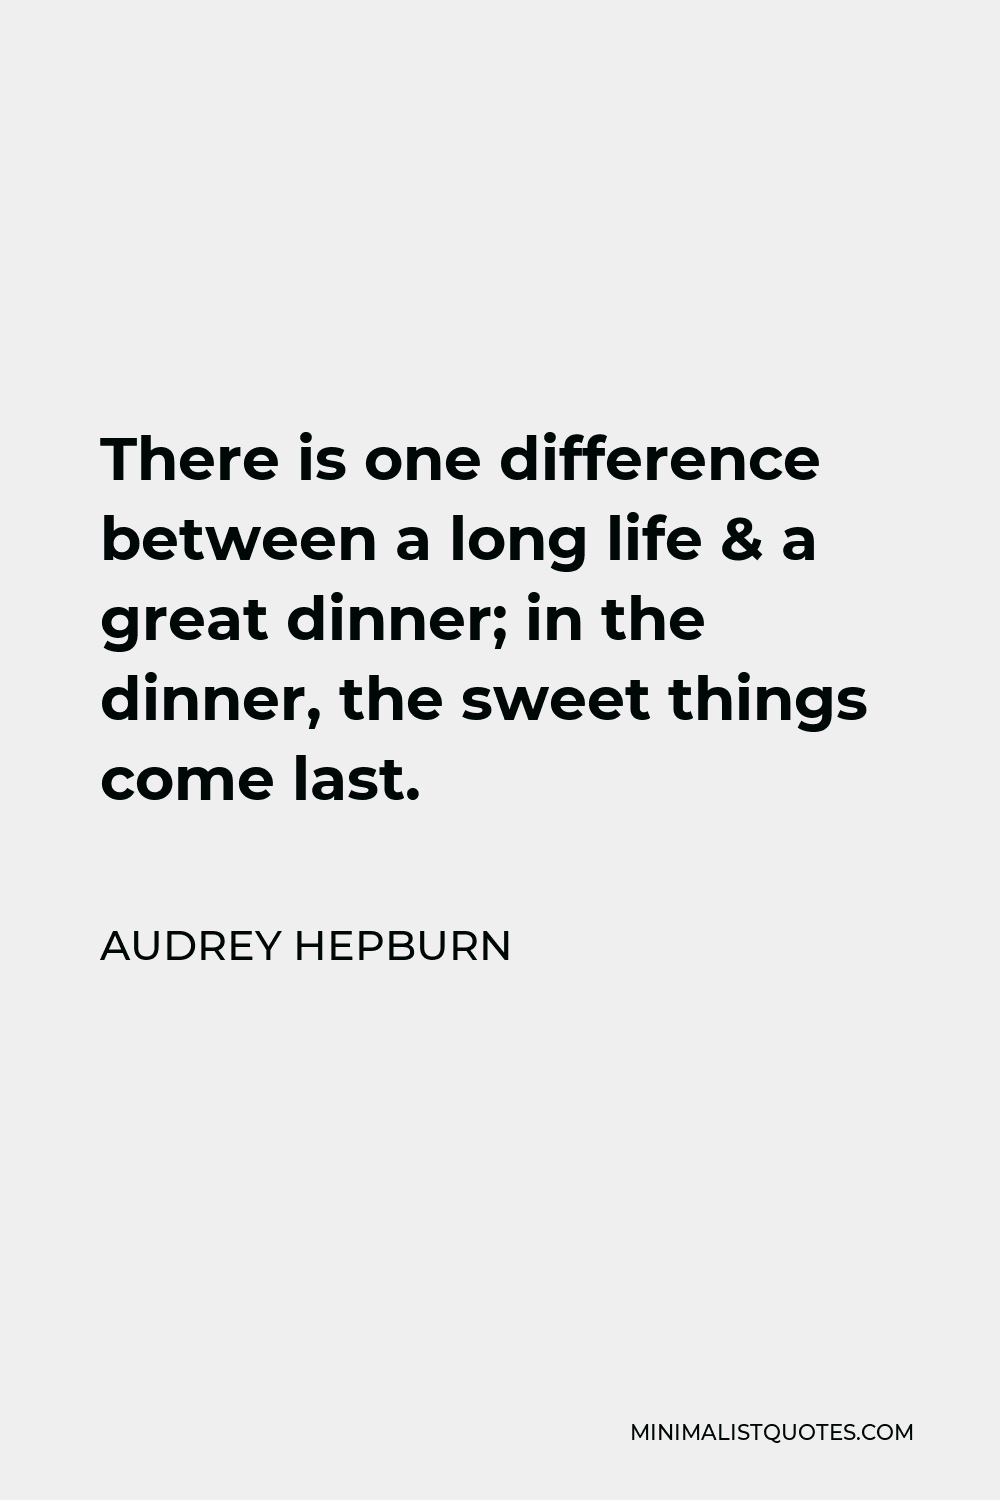 Audrey Hepburn Quote - There is one difference between a long life & a great dinner; in the dinner, the sweet things come last.